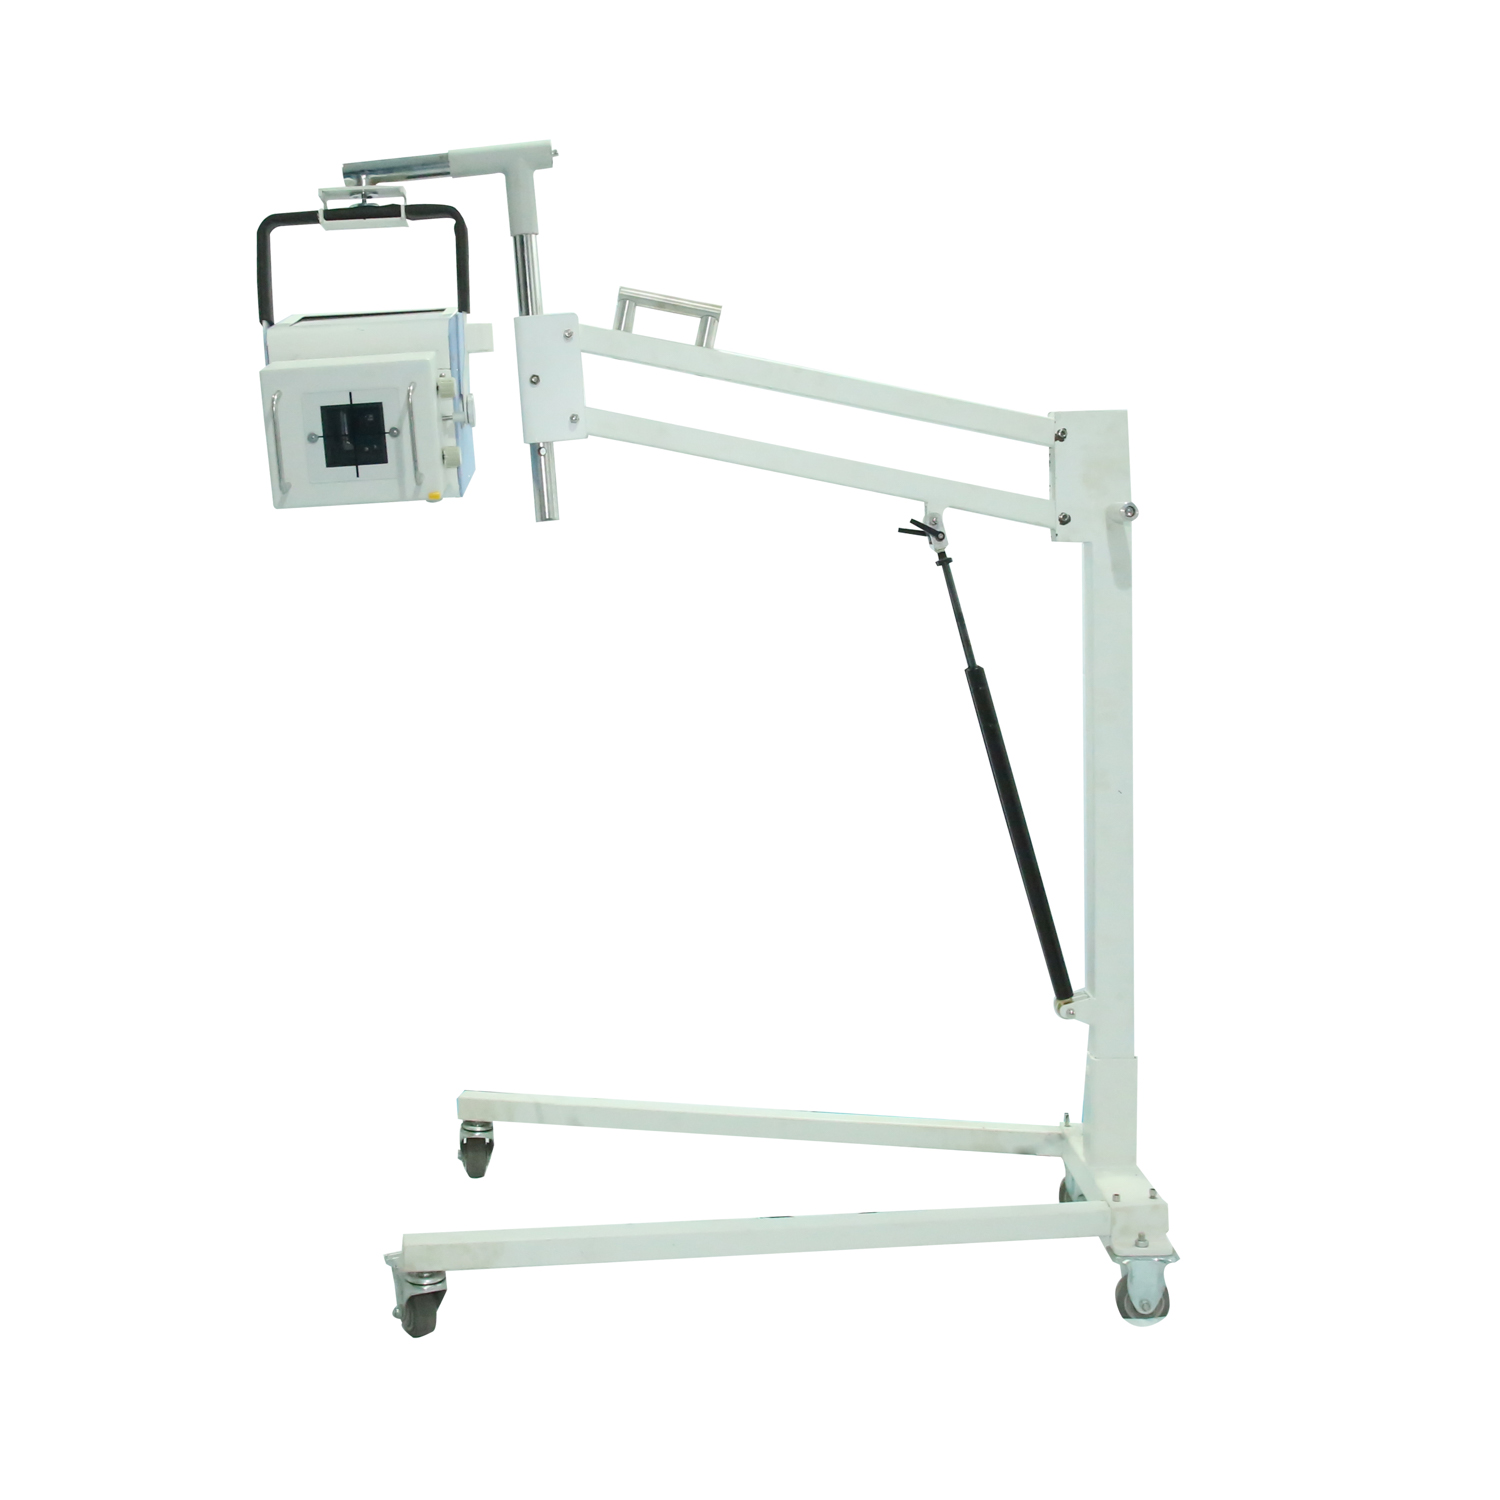 5kW 100mA High frequency portable & mobile x-ray machine